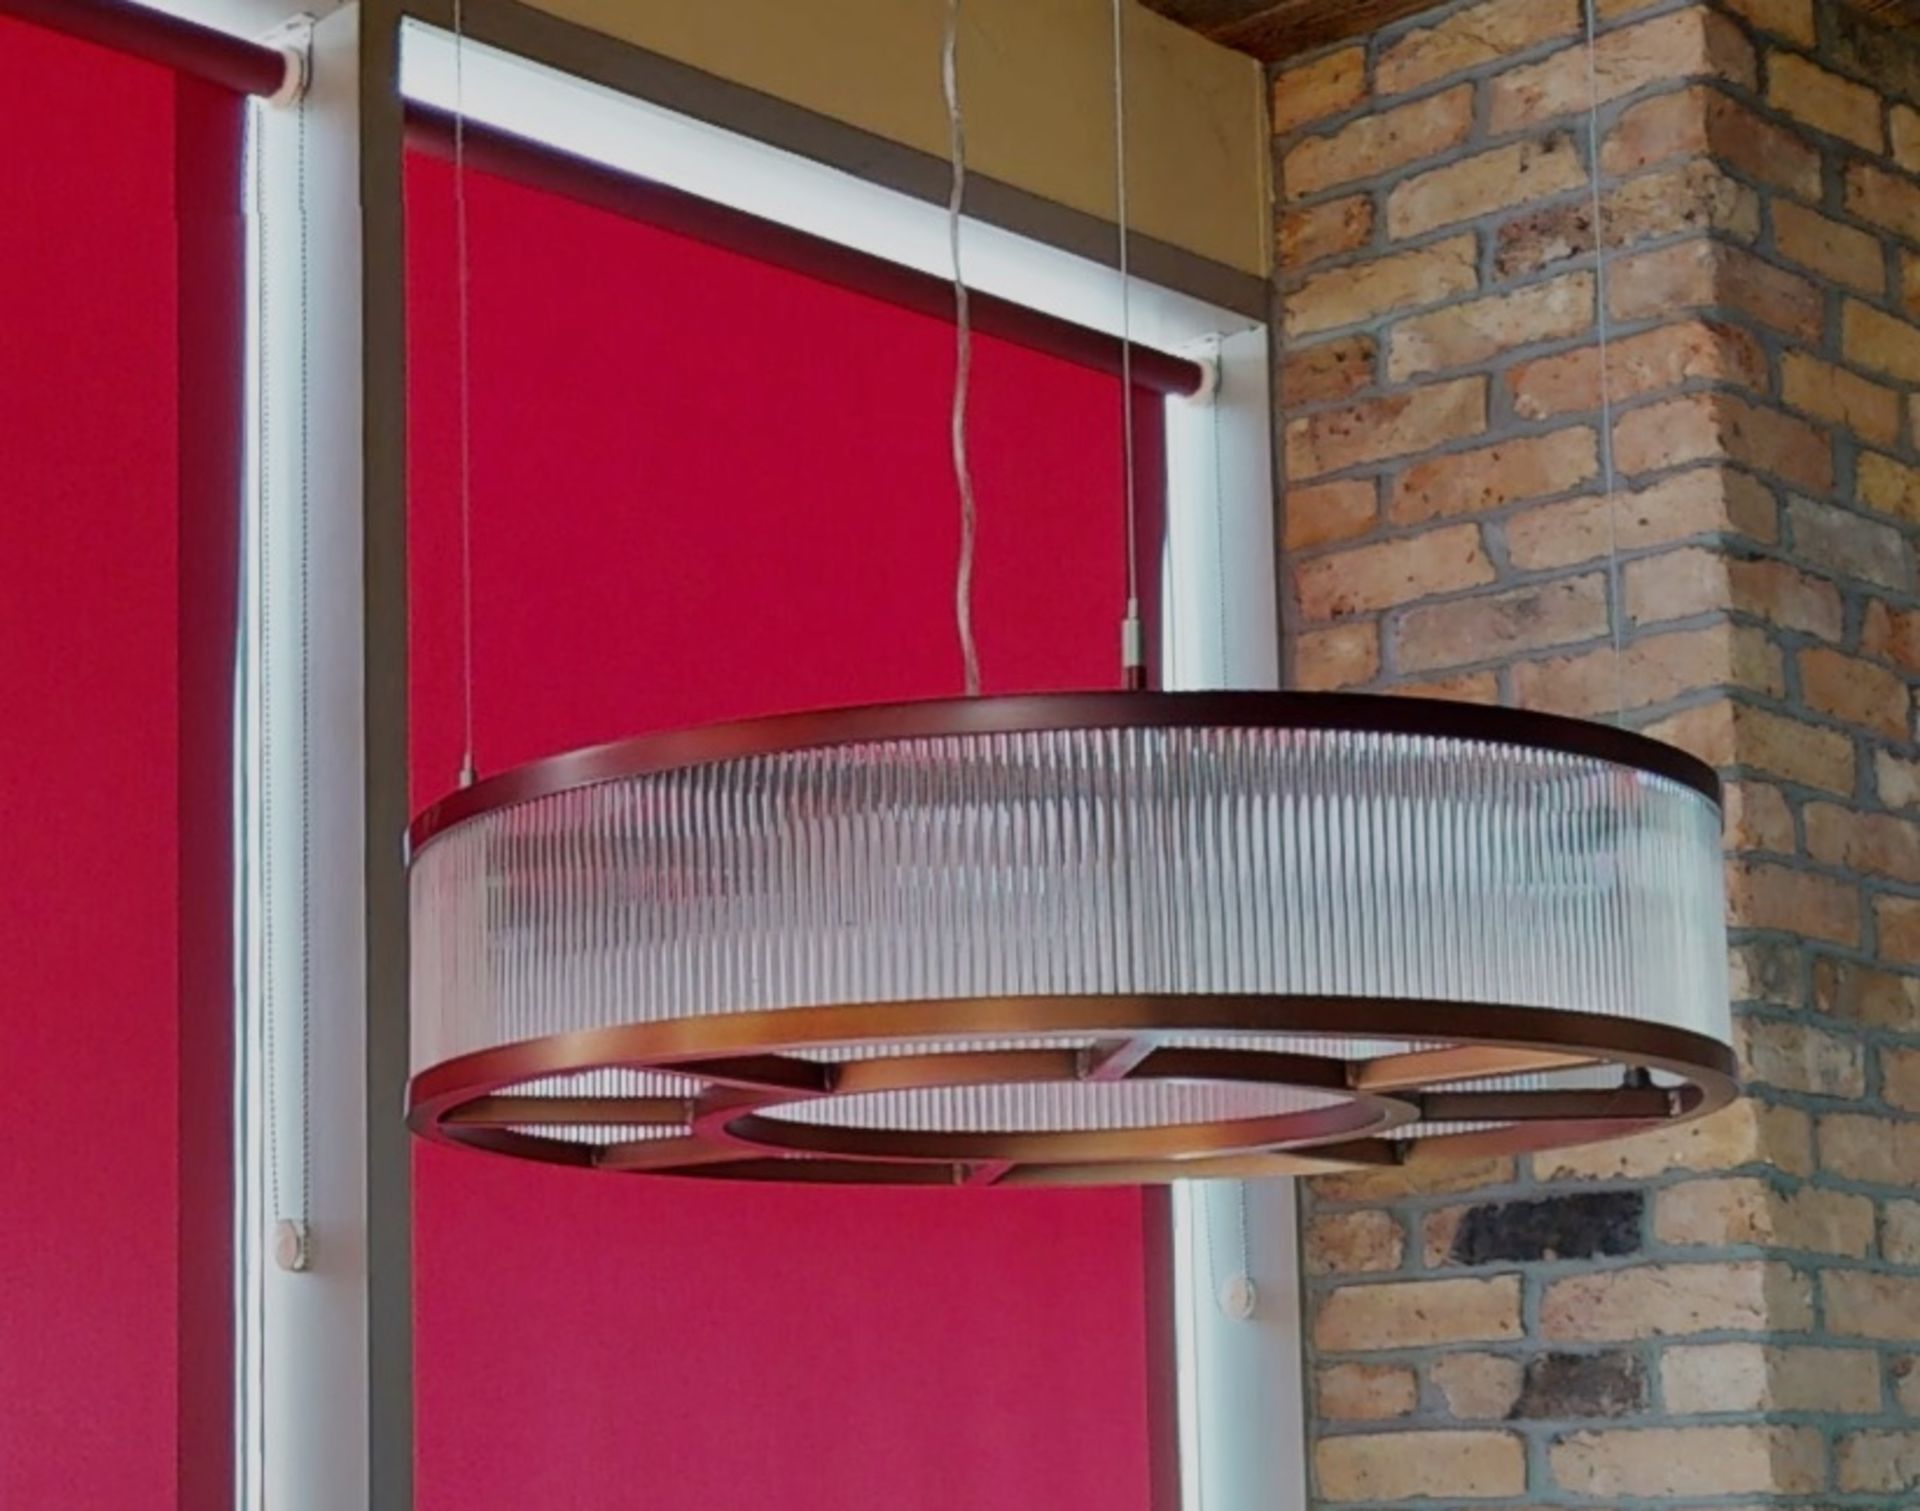 1 x Large Commercial Circular Art Deco-Style Suspended Light Fitting - Features A Copper Finish - Image 2 of 5